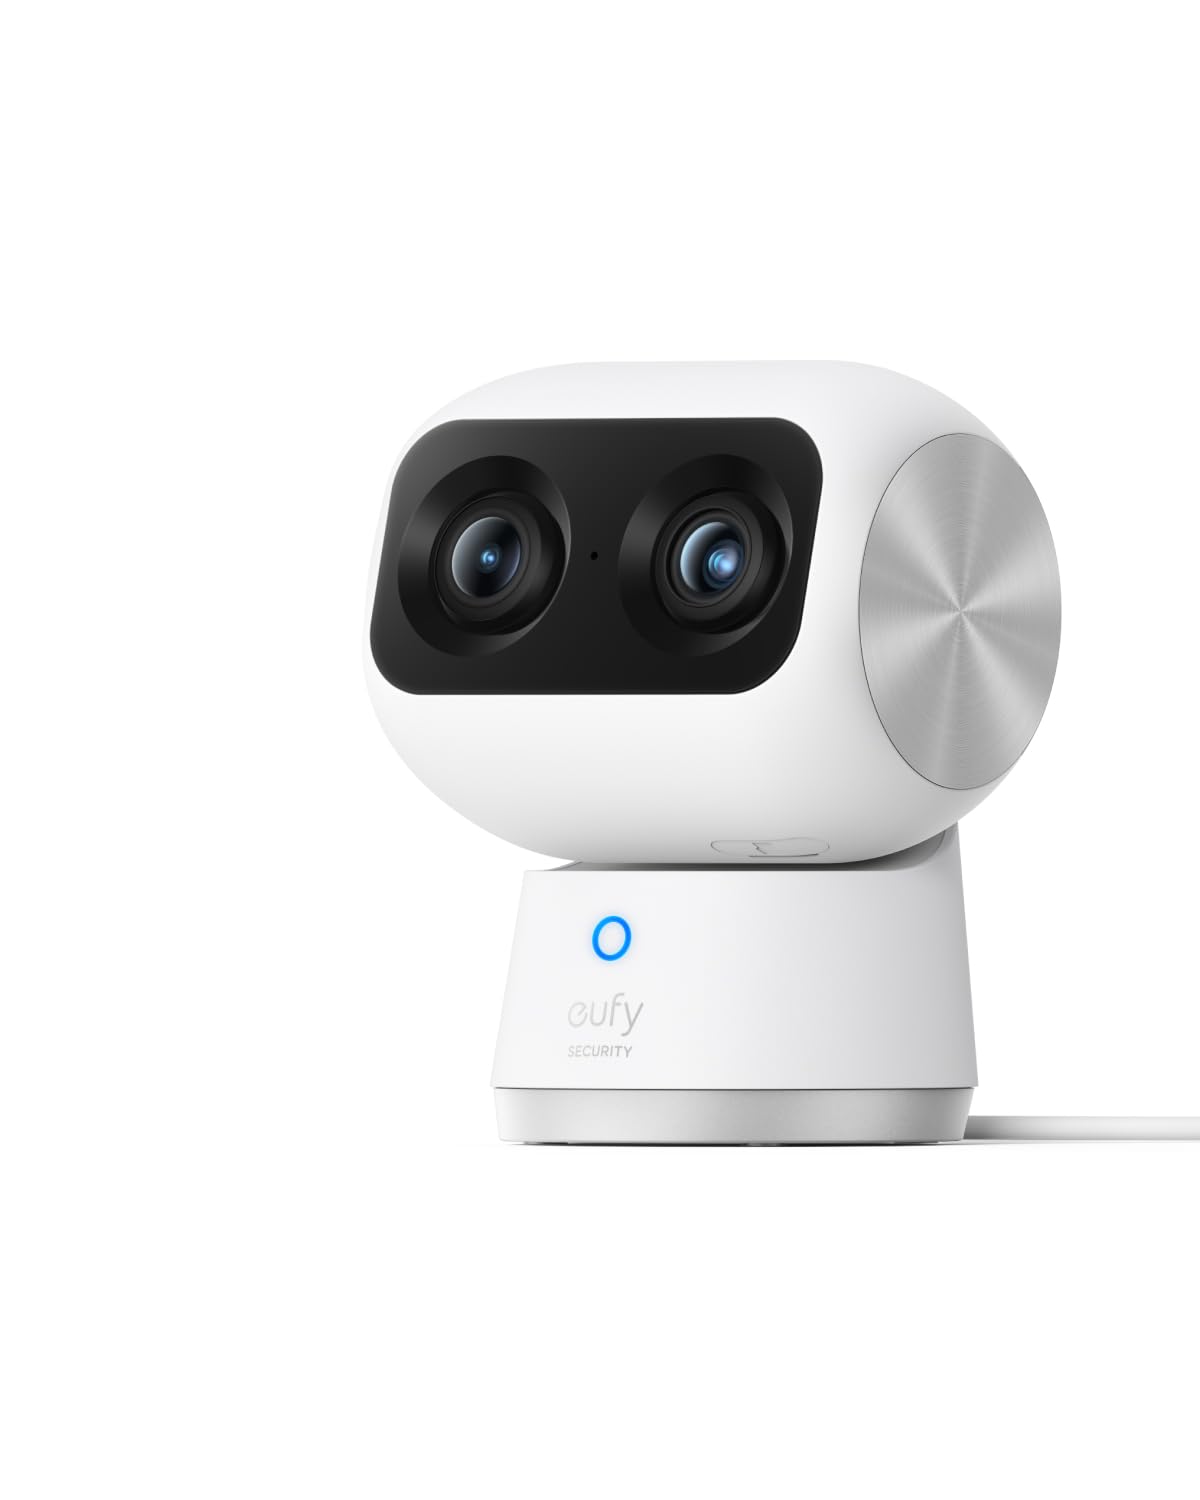 Up to 25% Off eufy Security Indoor Camera, eufy Security Indoor Cam S350, Dual Cameras, 4K UHD Resolution $99.99 + Free Shipping w/ Prime